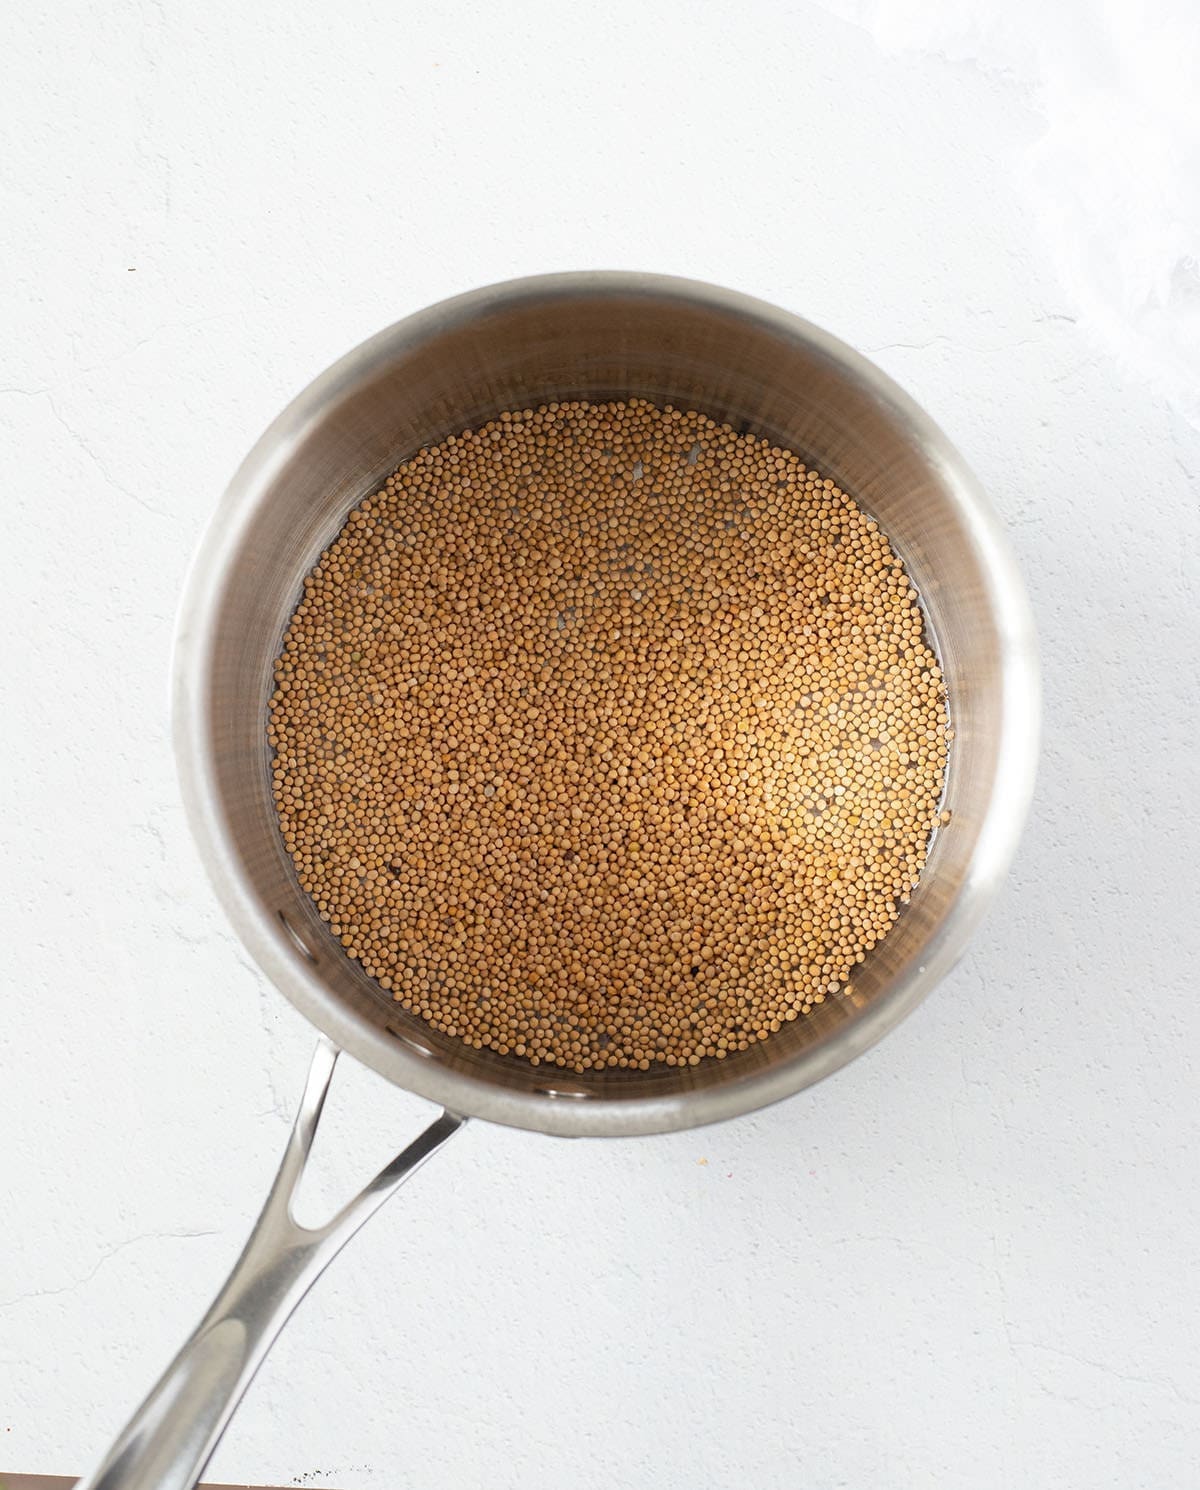 yellow seeds in a silver pan with water.